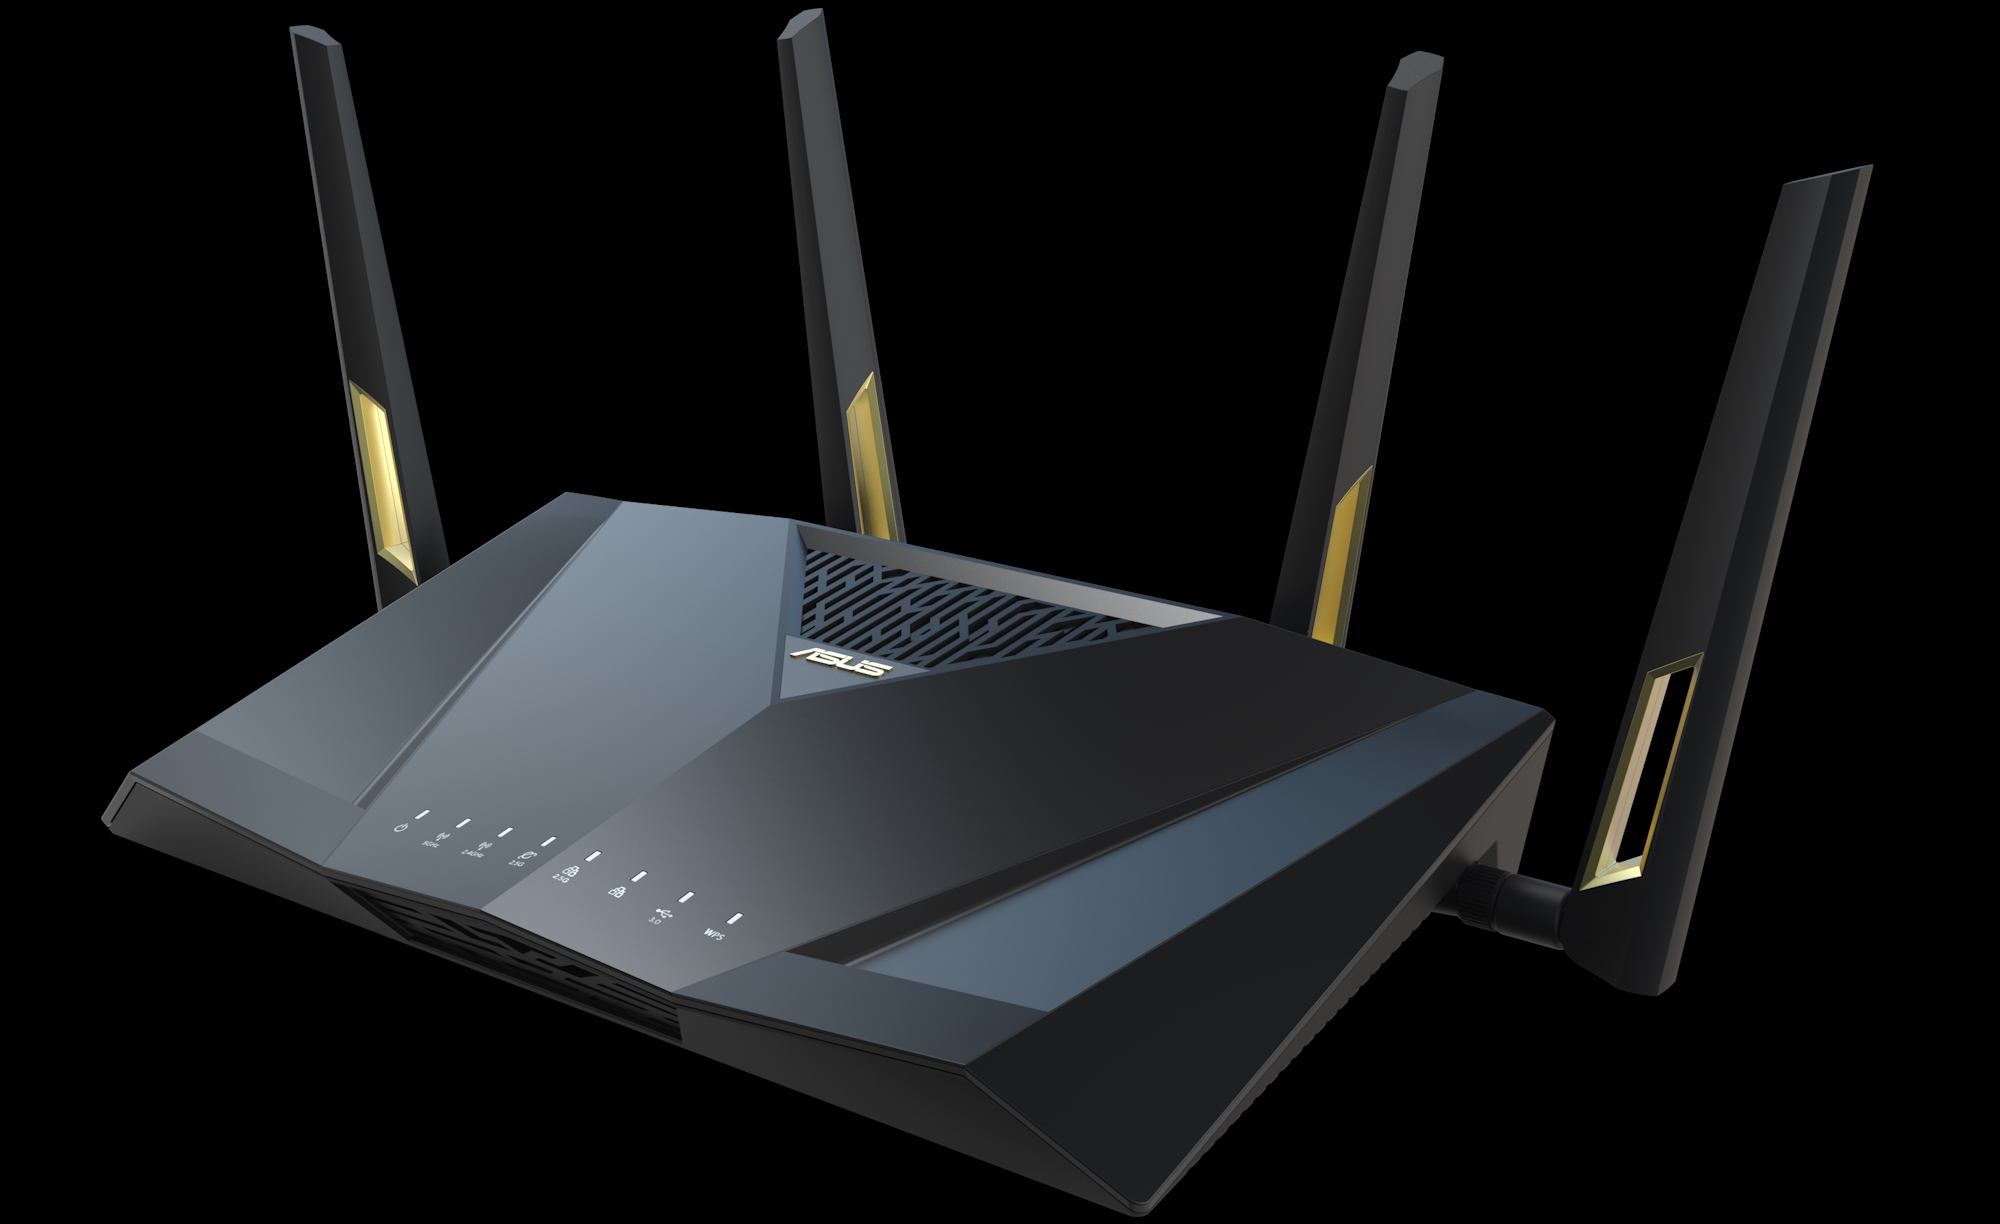 The ASUS RT_AX86U Pro wireless router